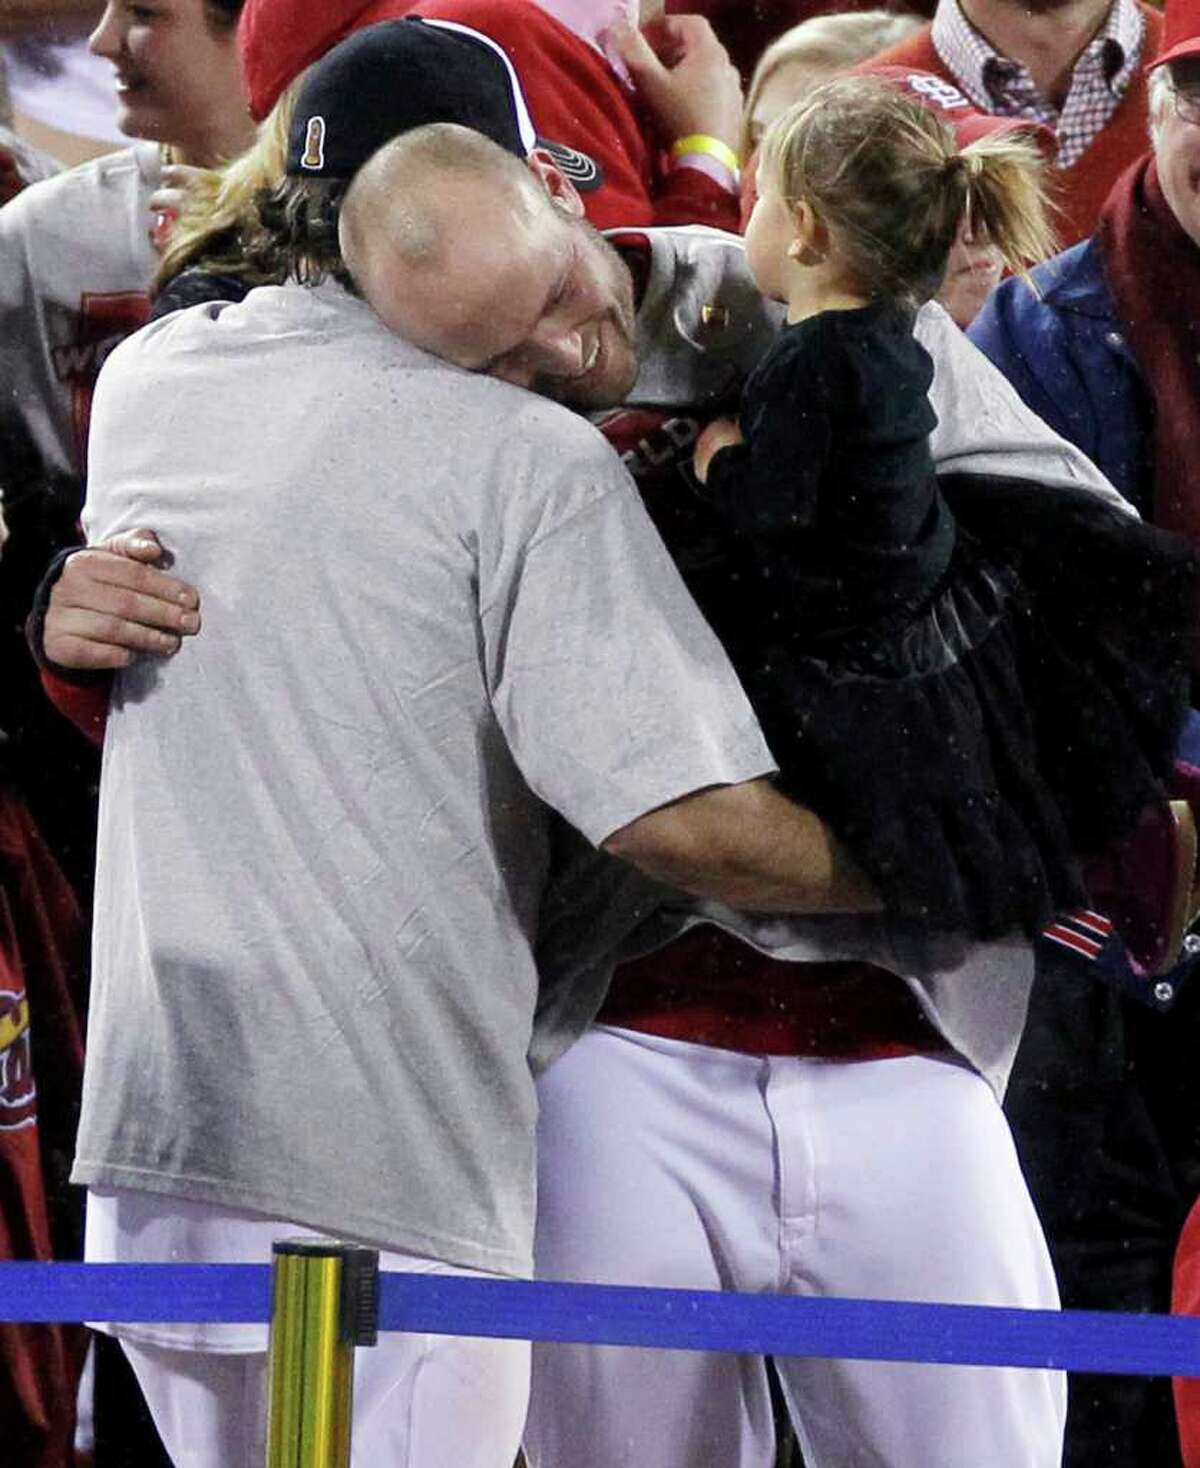 Photo: Cardinals Lance Berkman holds up the Commissioner's Trophy after  winning the 2011 World Series in St. Louis - STL20111028210 